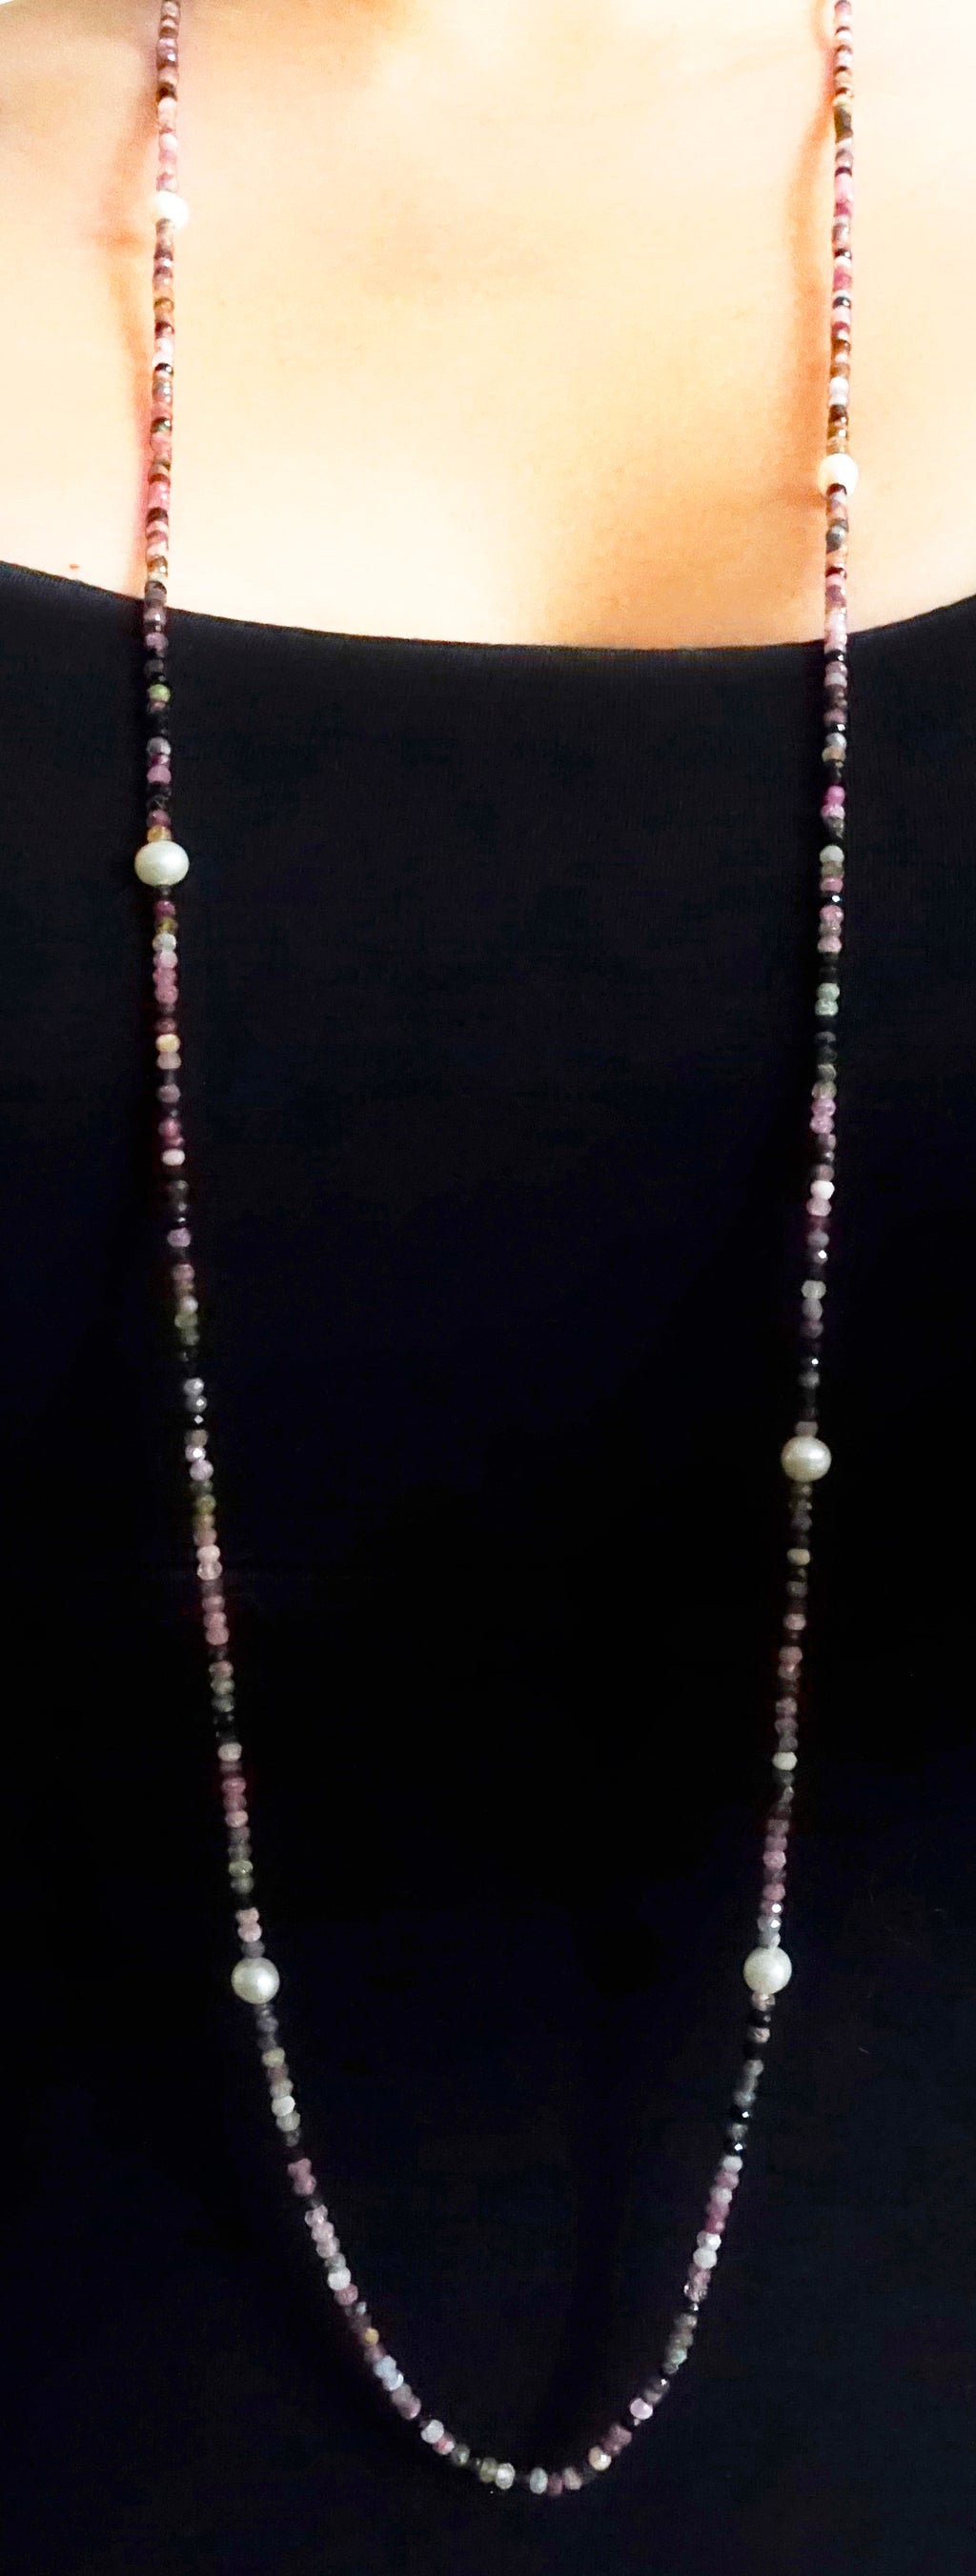 "Forest Berries" Pink & Green Tourmaline with Pearl Long Necklace